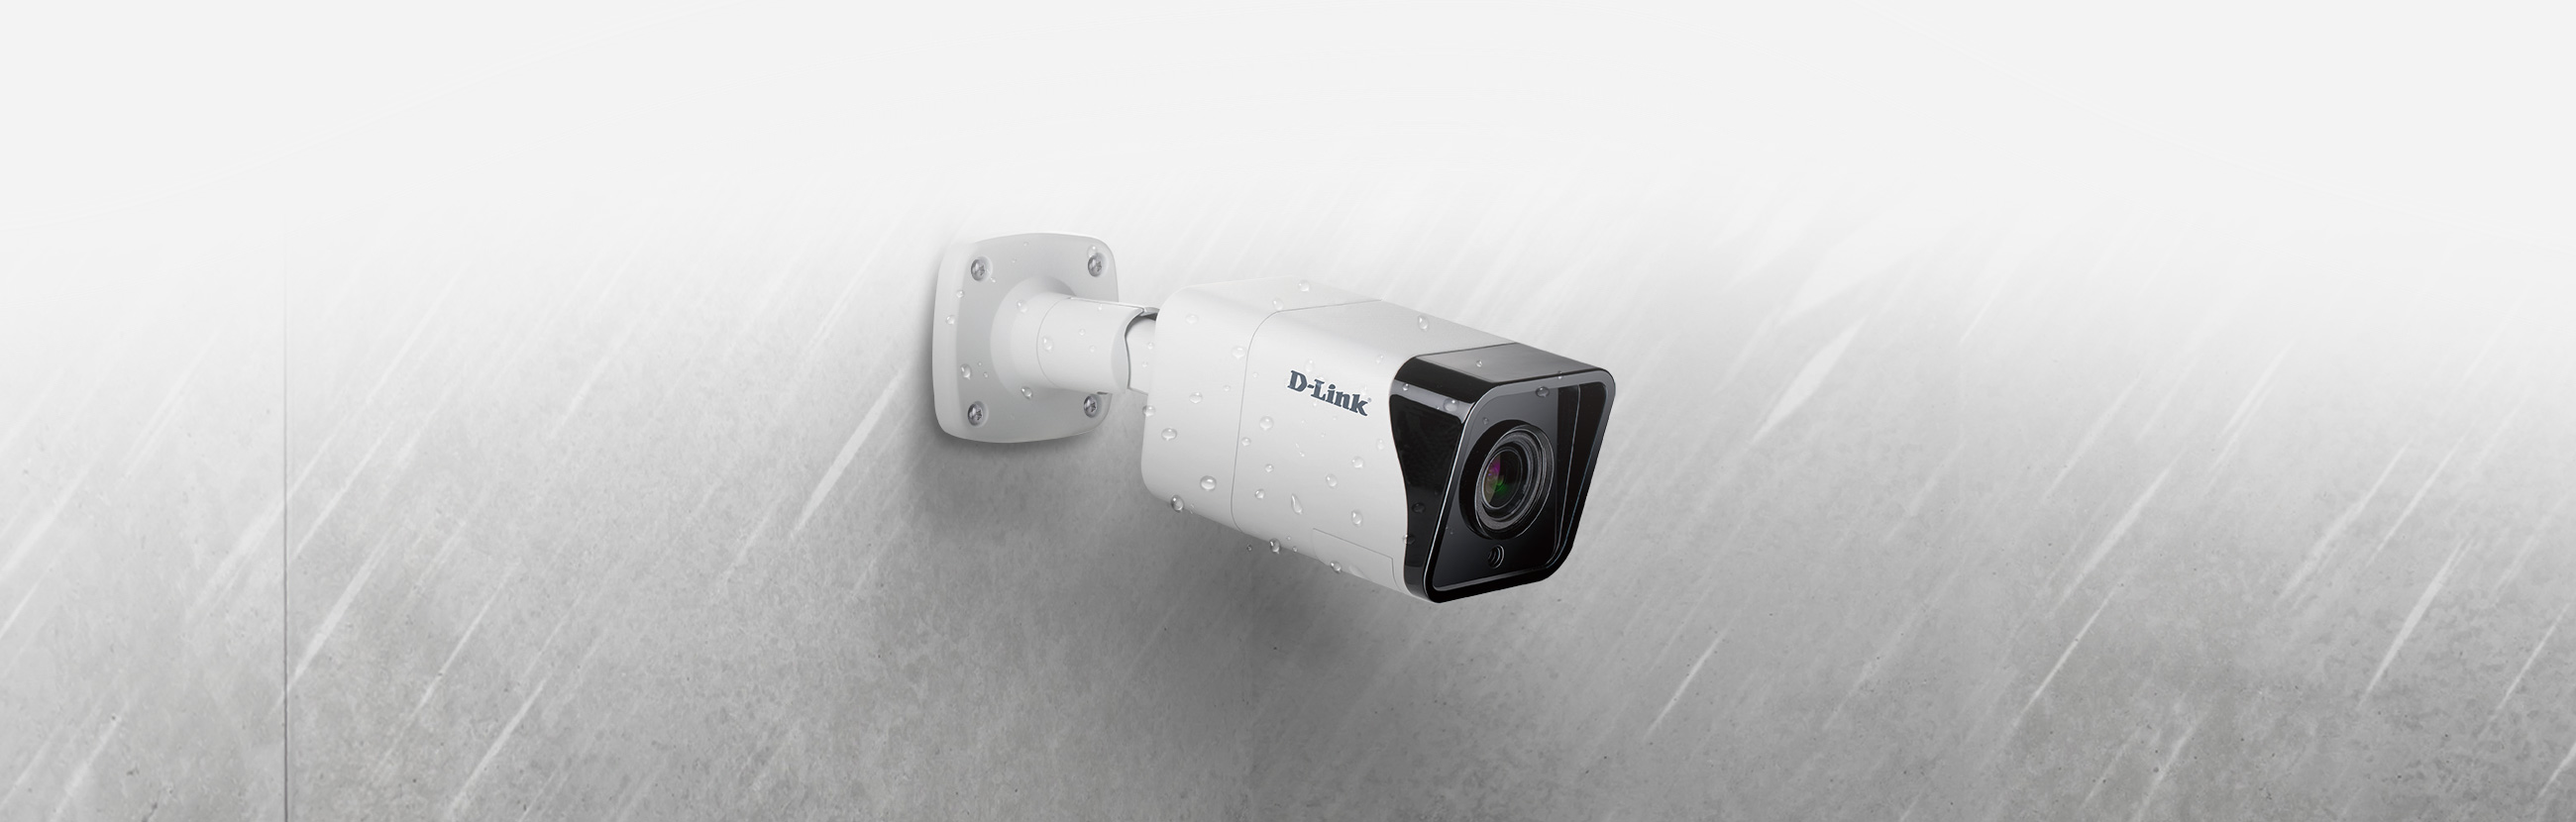 DCS-4712E Vigilance 2 Megapixel H.265 Outdoor Bullet Camera - mounted on a wall in the rain.